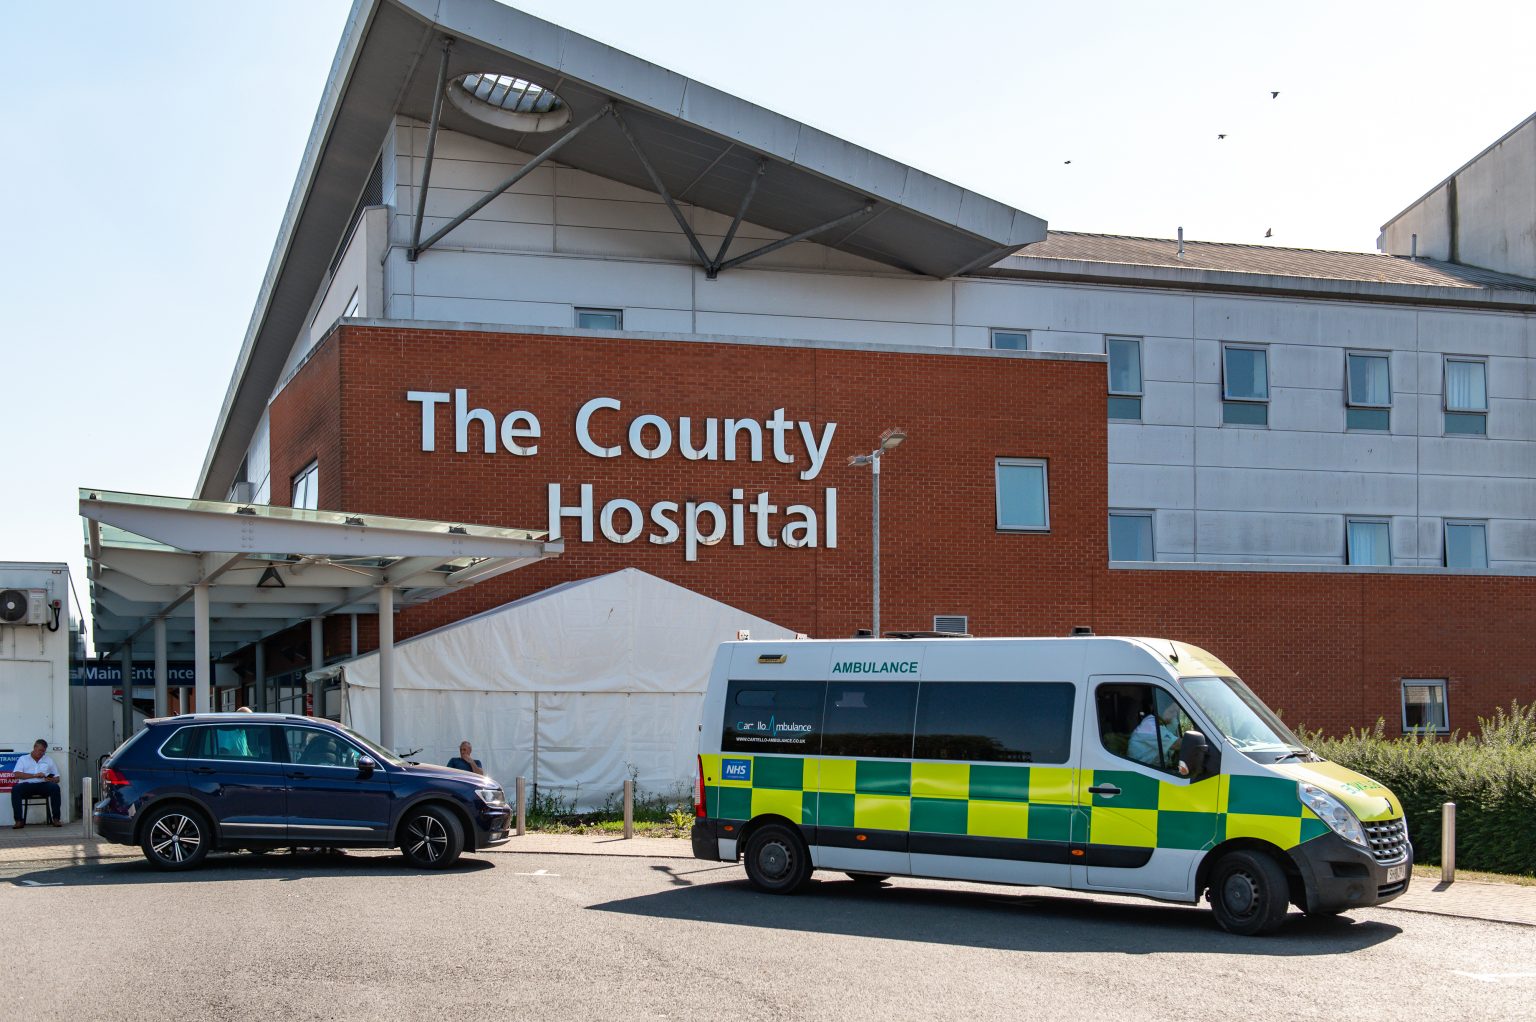 NEWS | A survey of maternity services has put Wye Valley NHS Trust better than many others in a handful of areas